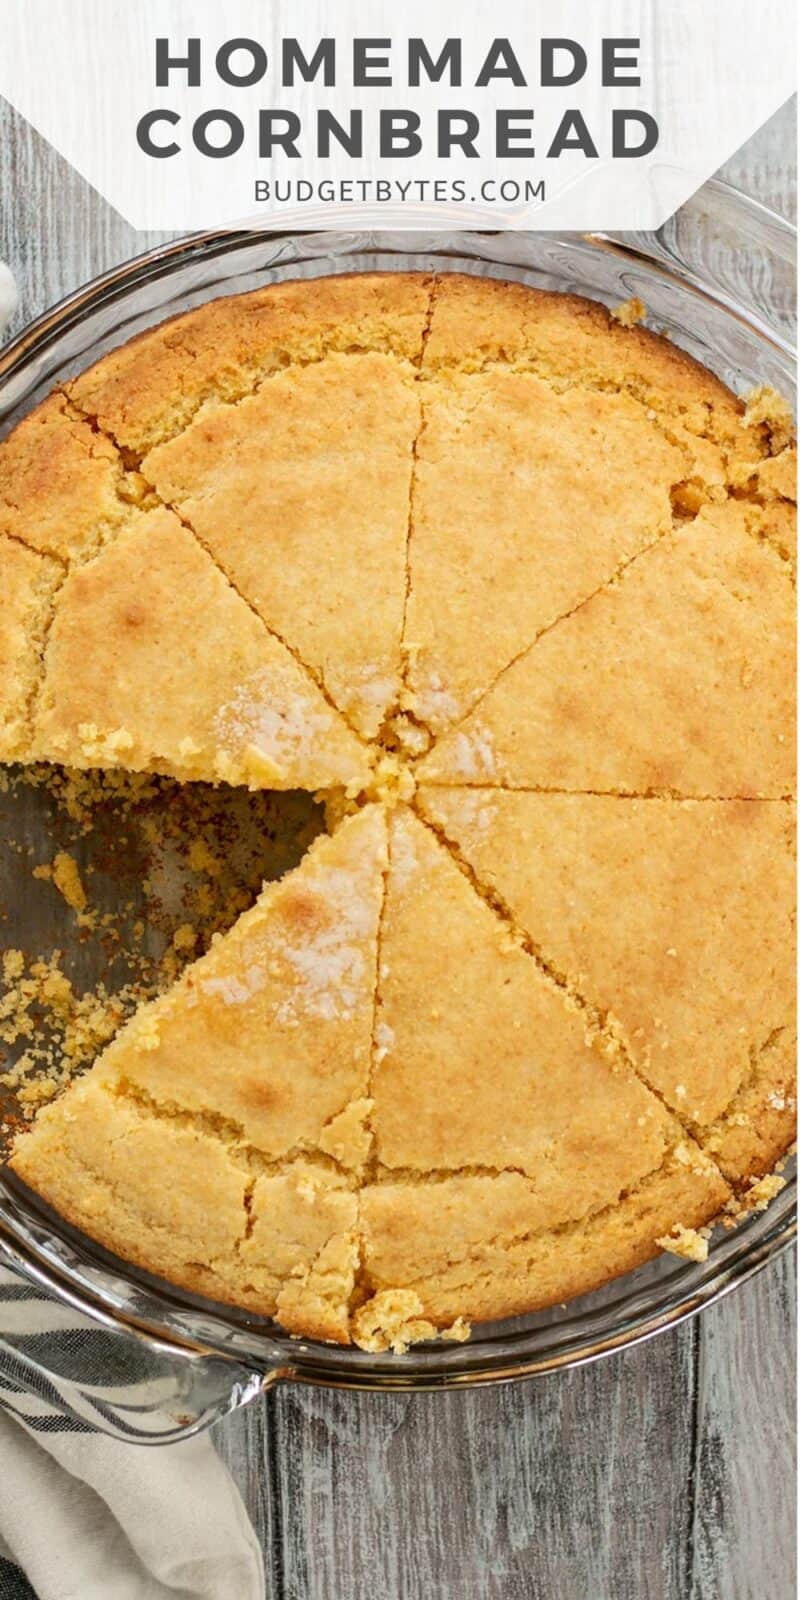 Overhead view of cornbread in the baking dish sliced into pieces.